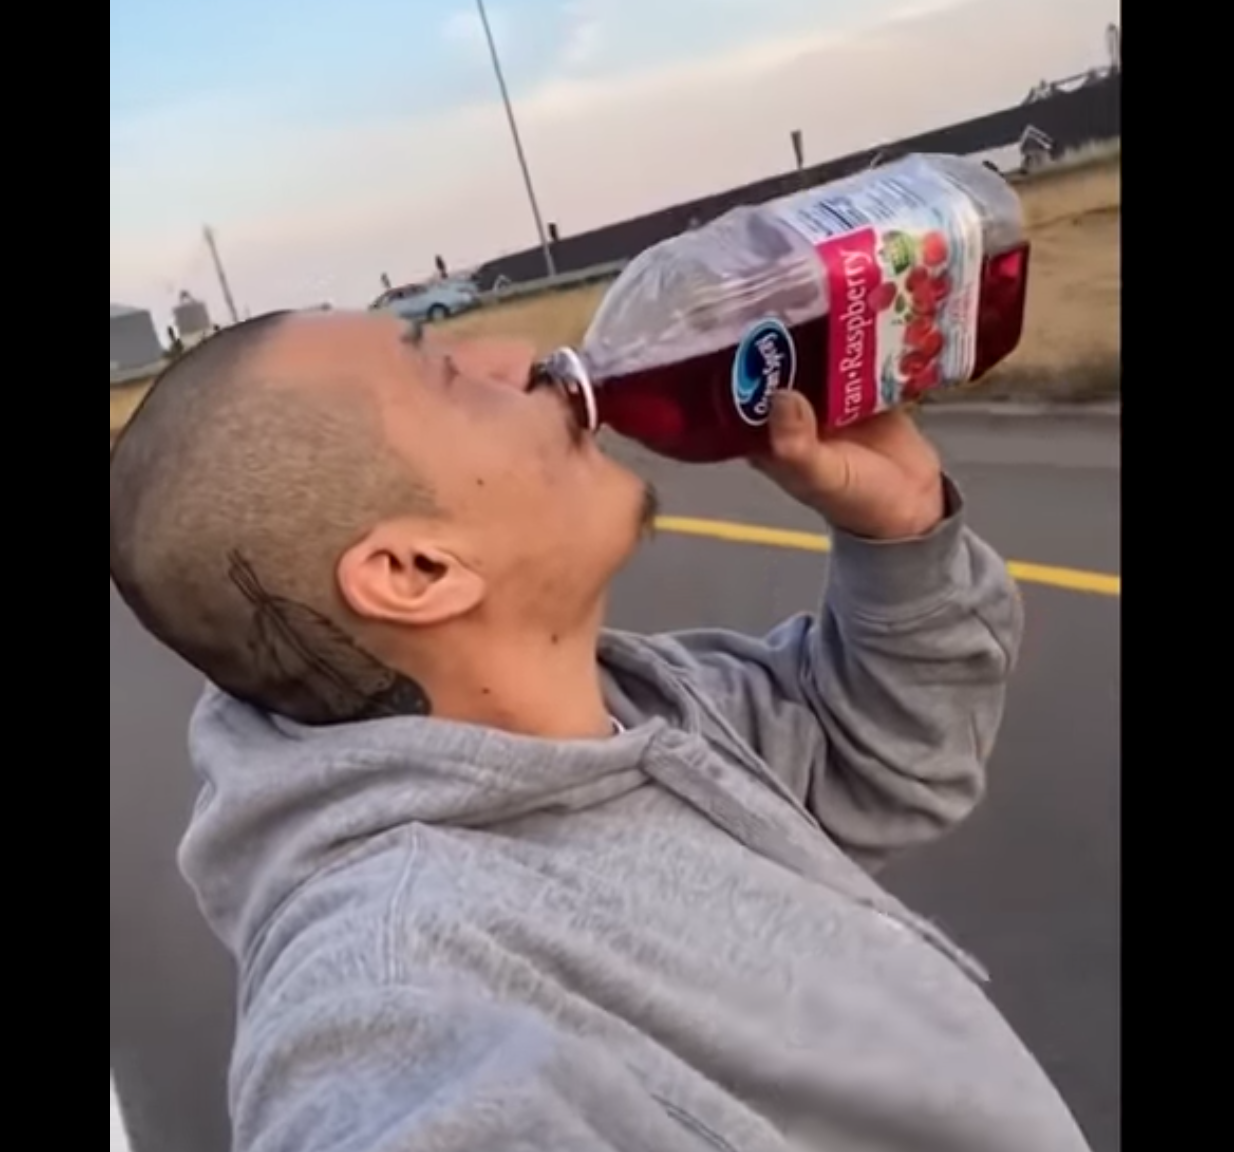 Man Who Went Viral Cruising On Skateboard Gifted Truck By Ocean Spray’s CEO